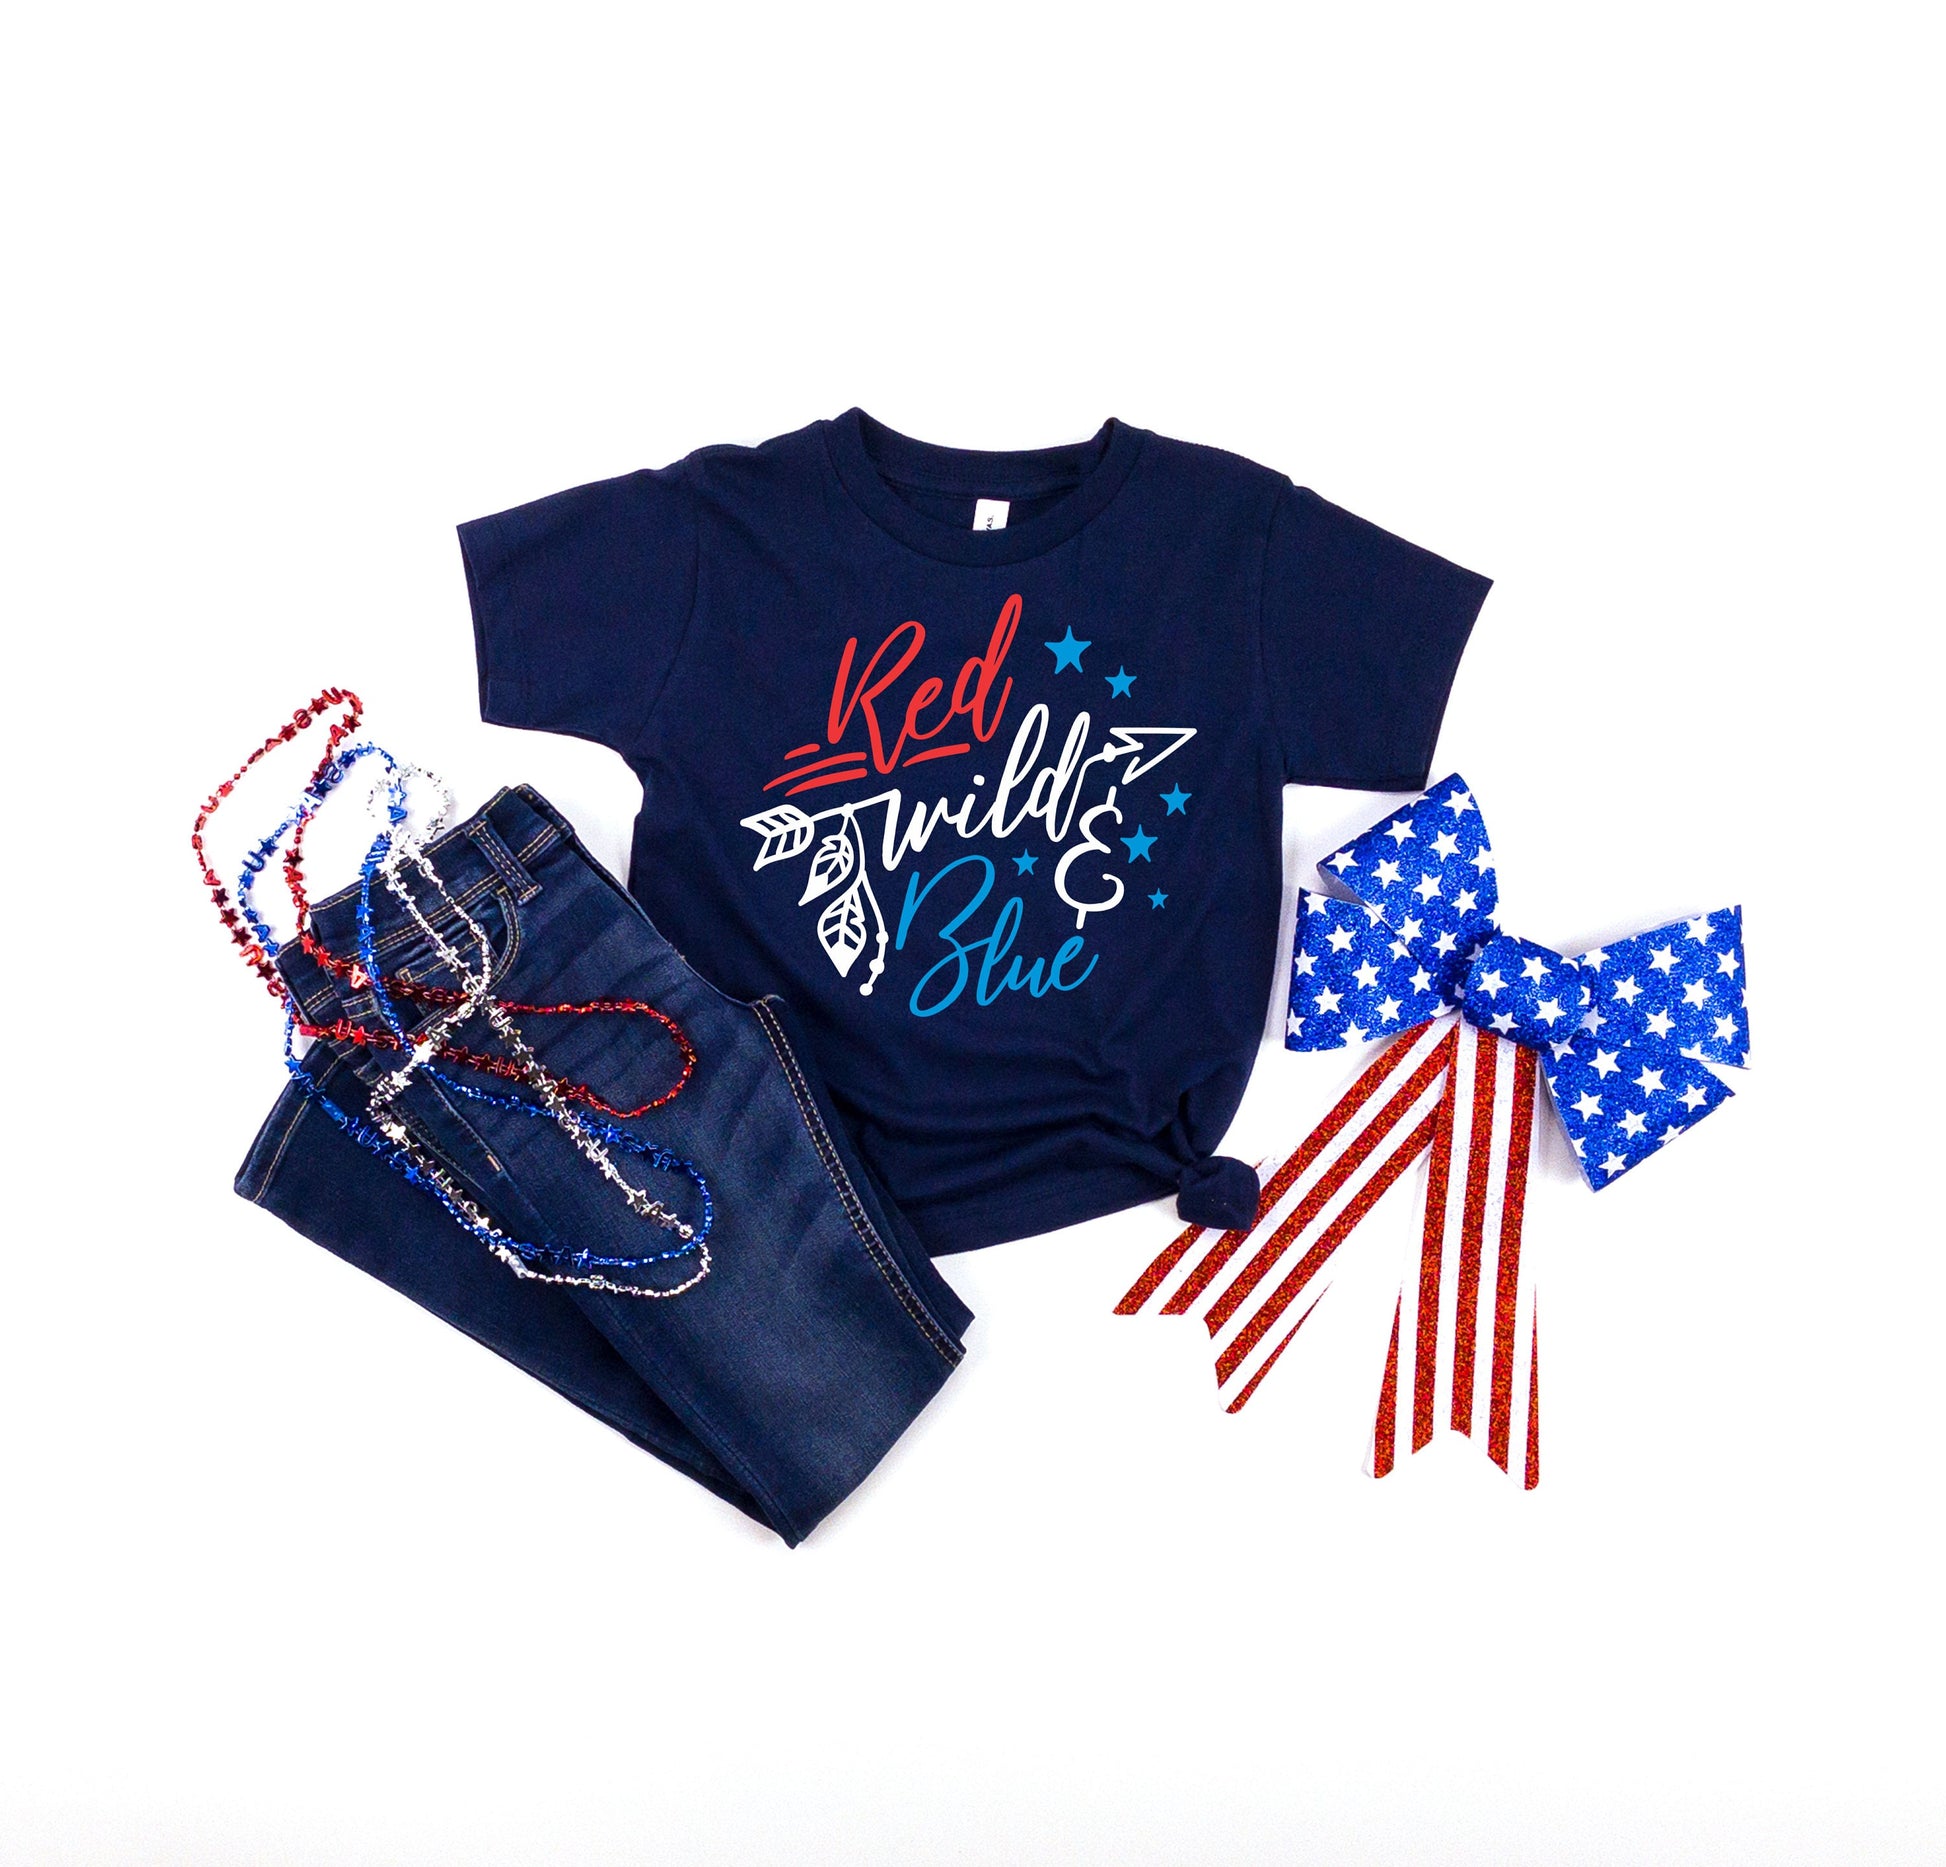 Red Wild and Blue Shirt - Toddler 4th of July Shirt - Fourth of July Kids Shirt